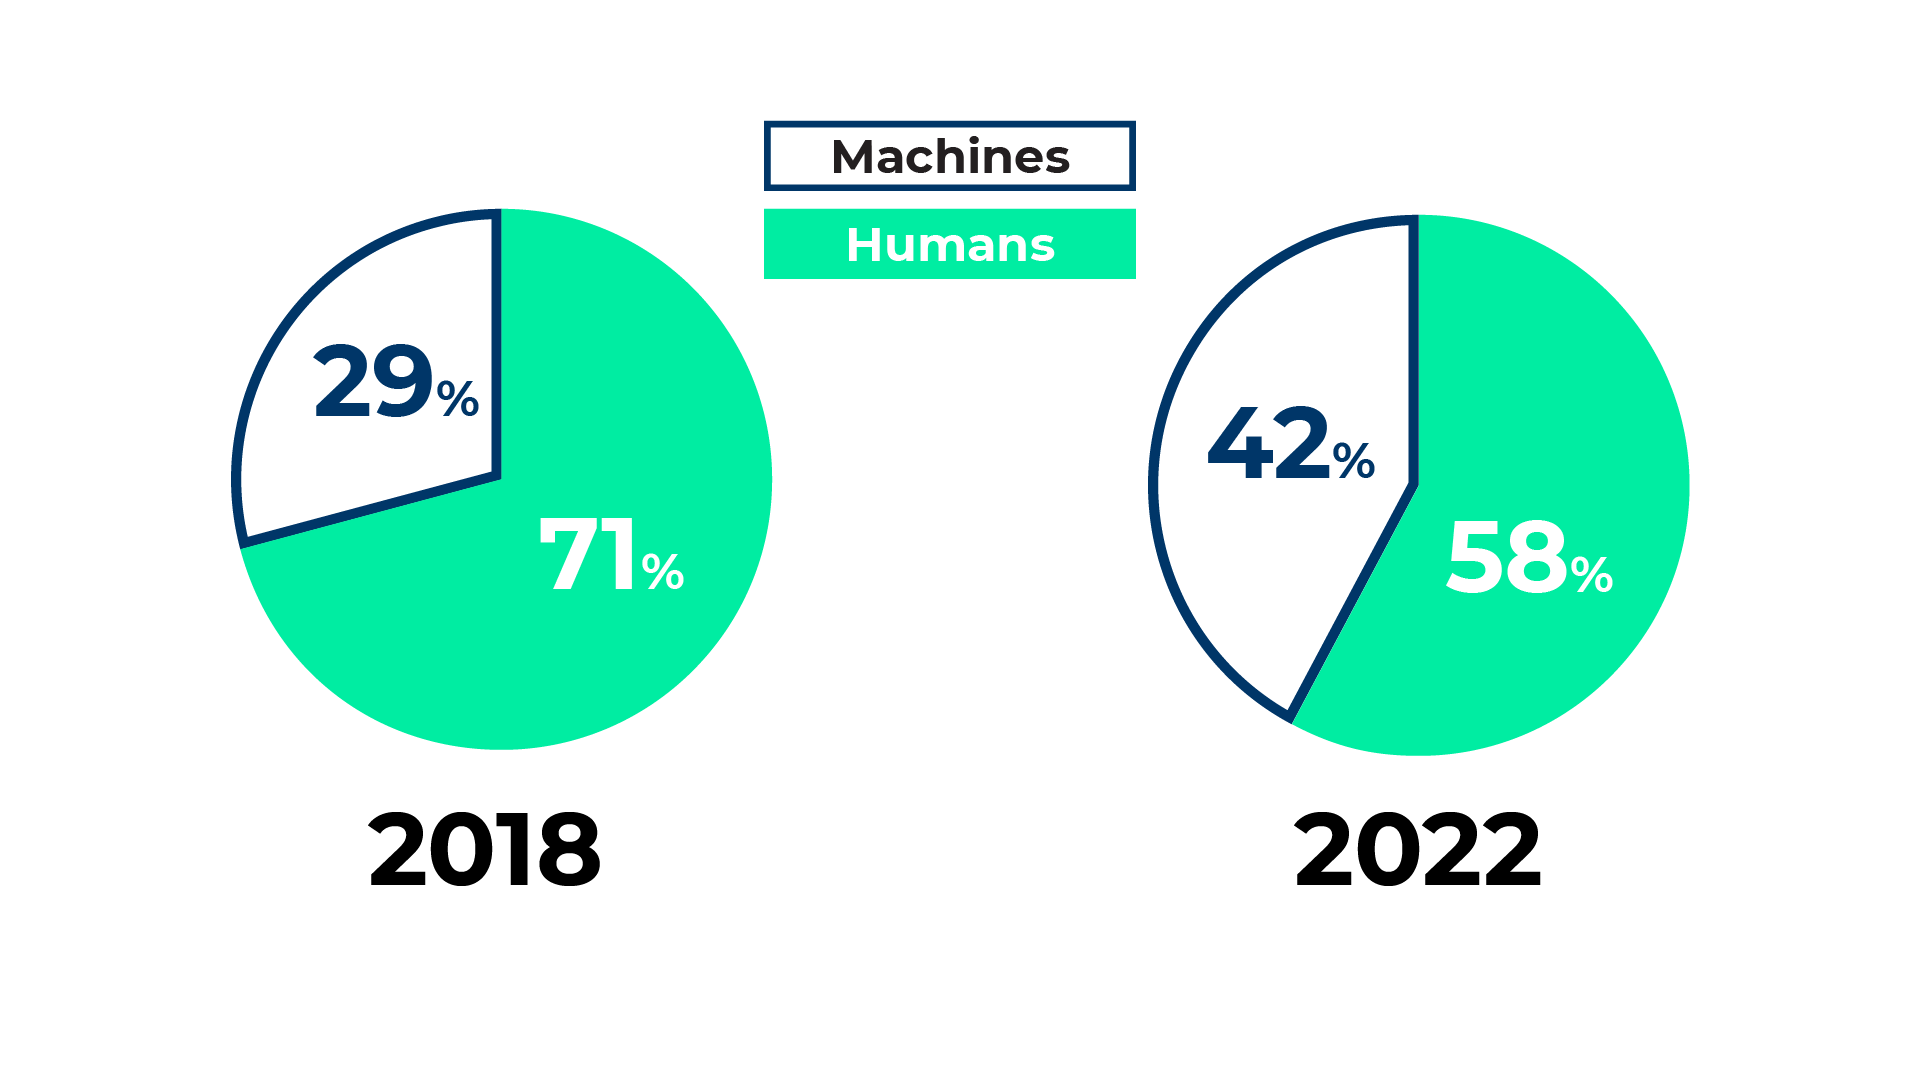 These figures demonstrate that a certain number of technical skills now assumed by human beings will be soon be obsolete.